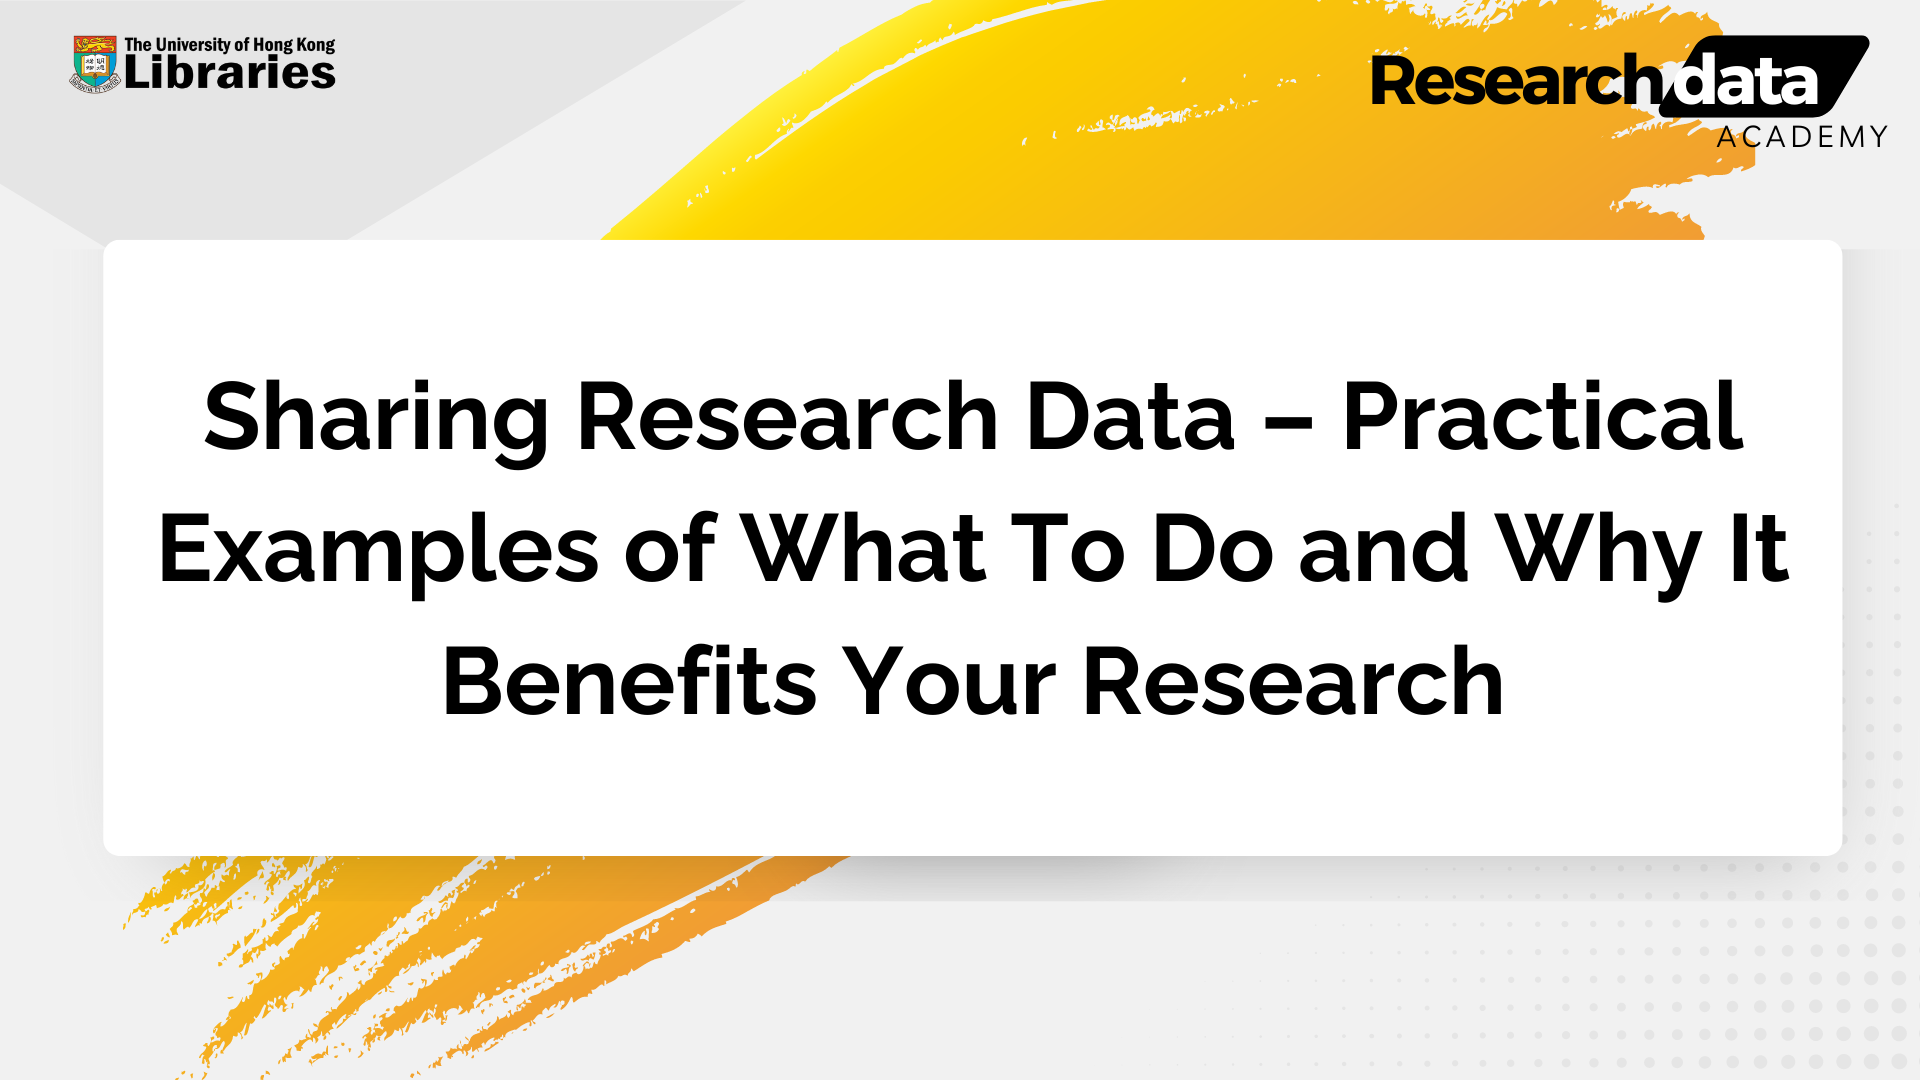 Sharing Research Data – Practical Examples of What To Do and Why It Benefits Your Research